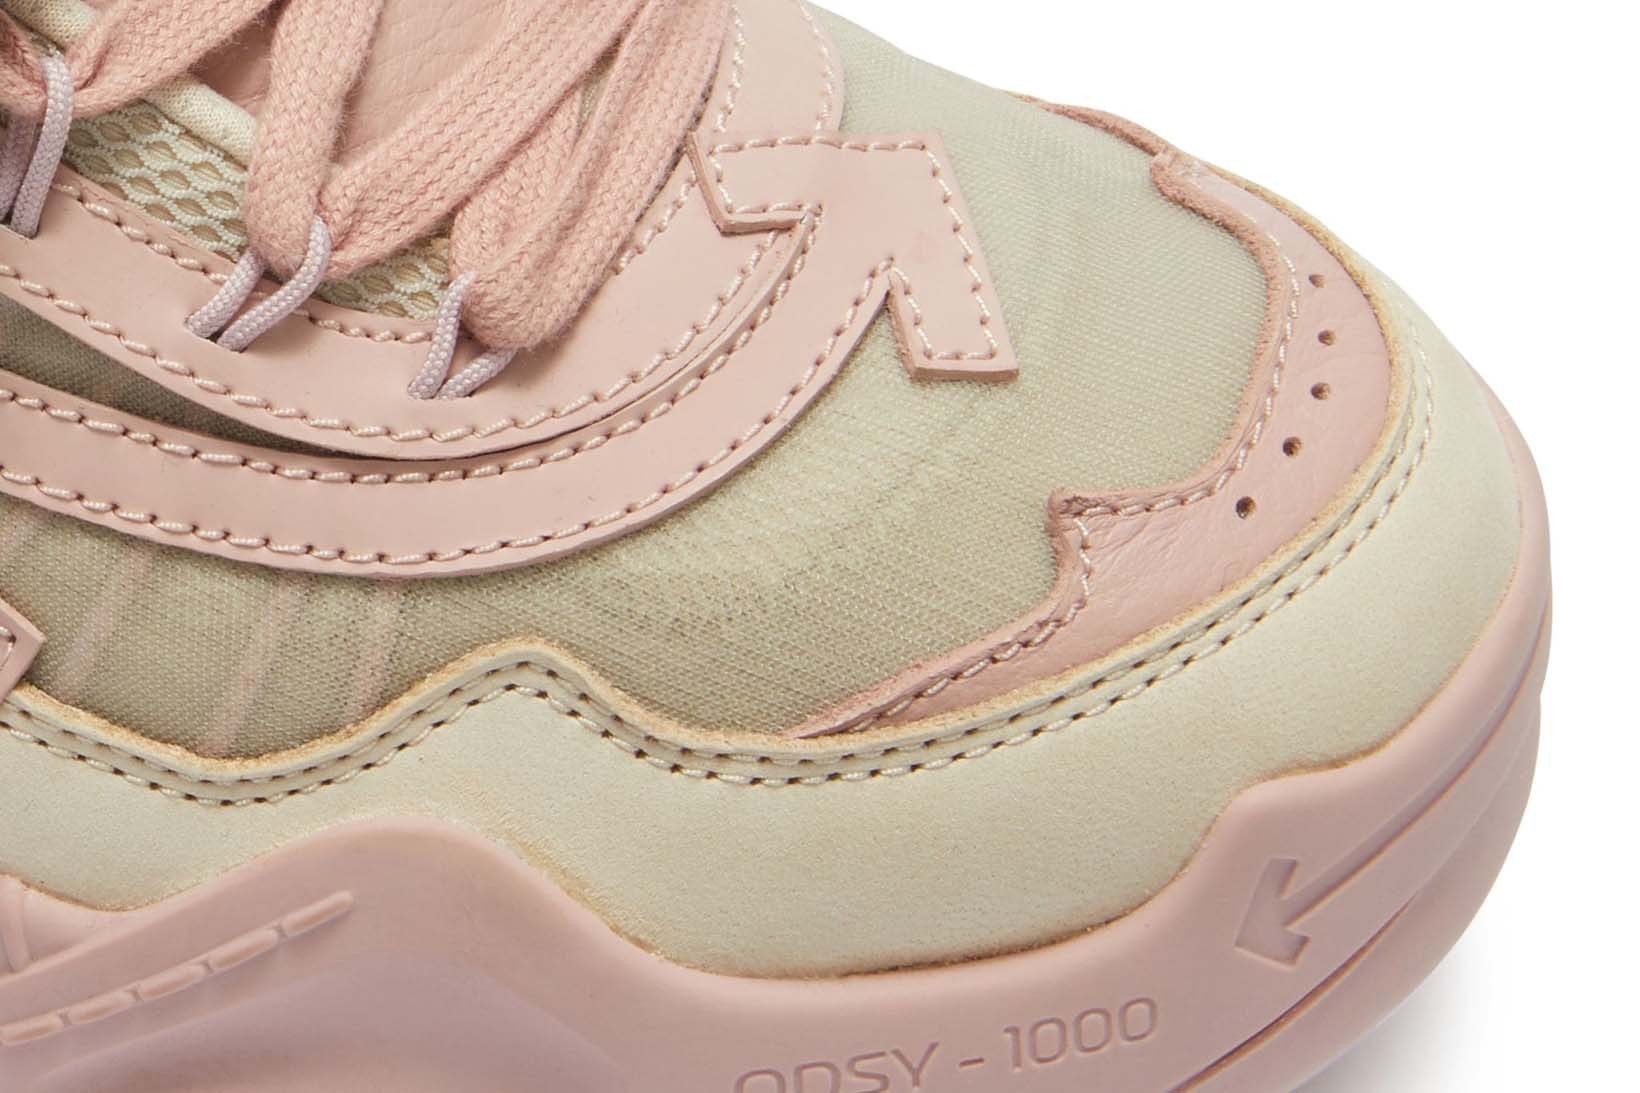 Off-White™ Odsy-1000 Pink Beige Chunky Sneaker Virgil Abloh Price Release Date